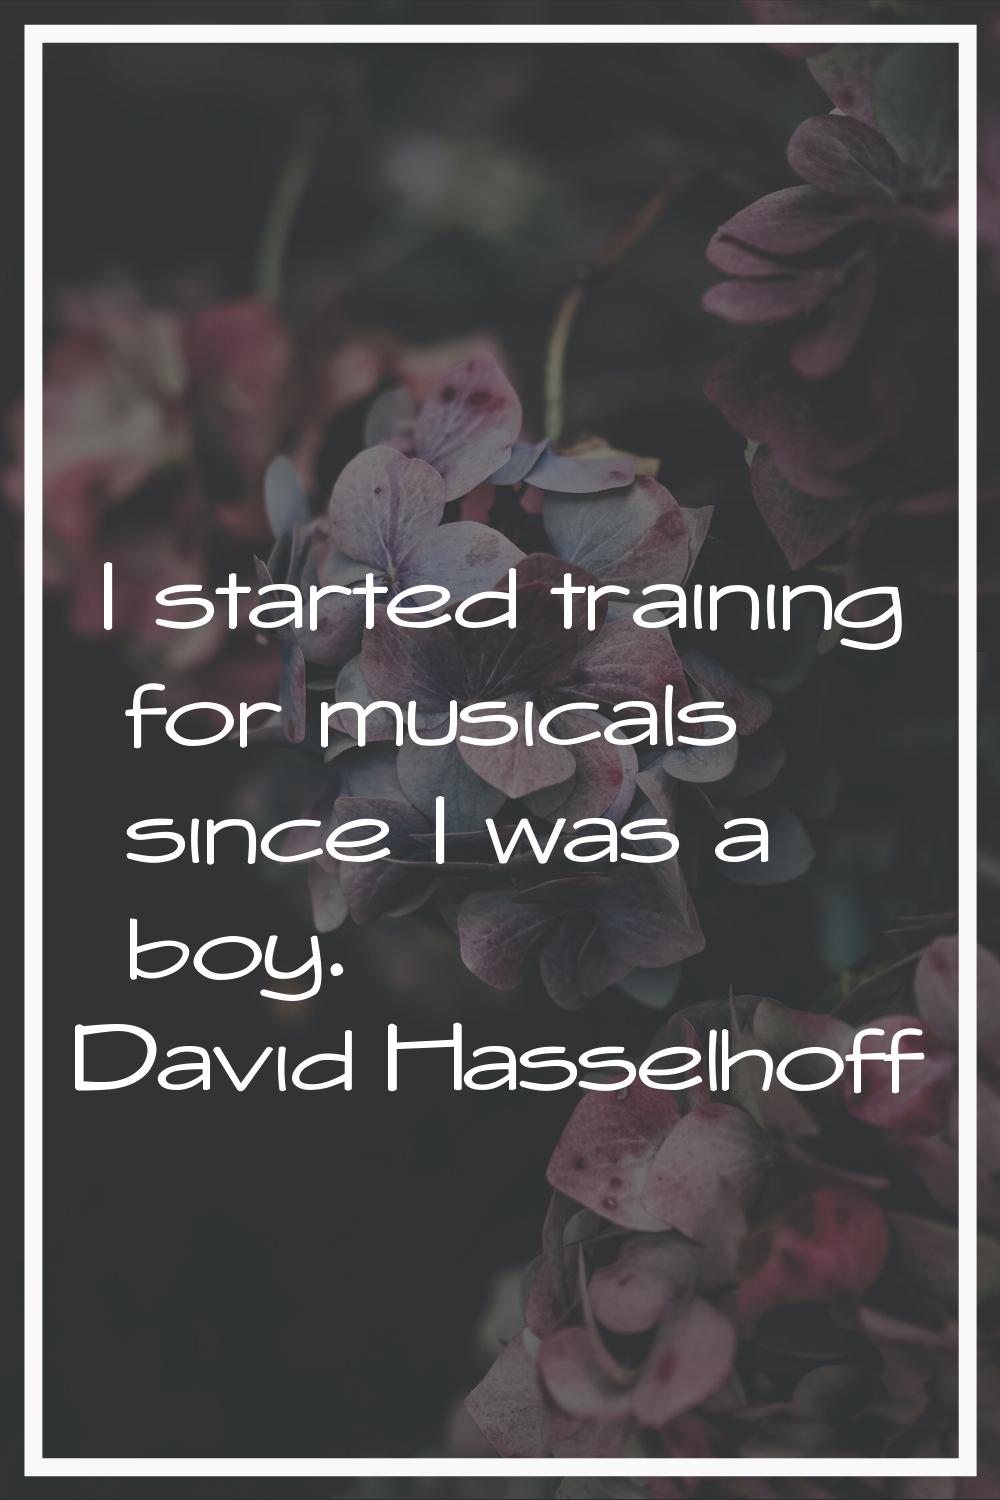 I started training for musicals since I was a boy.